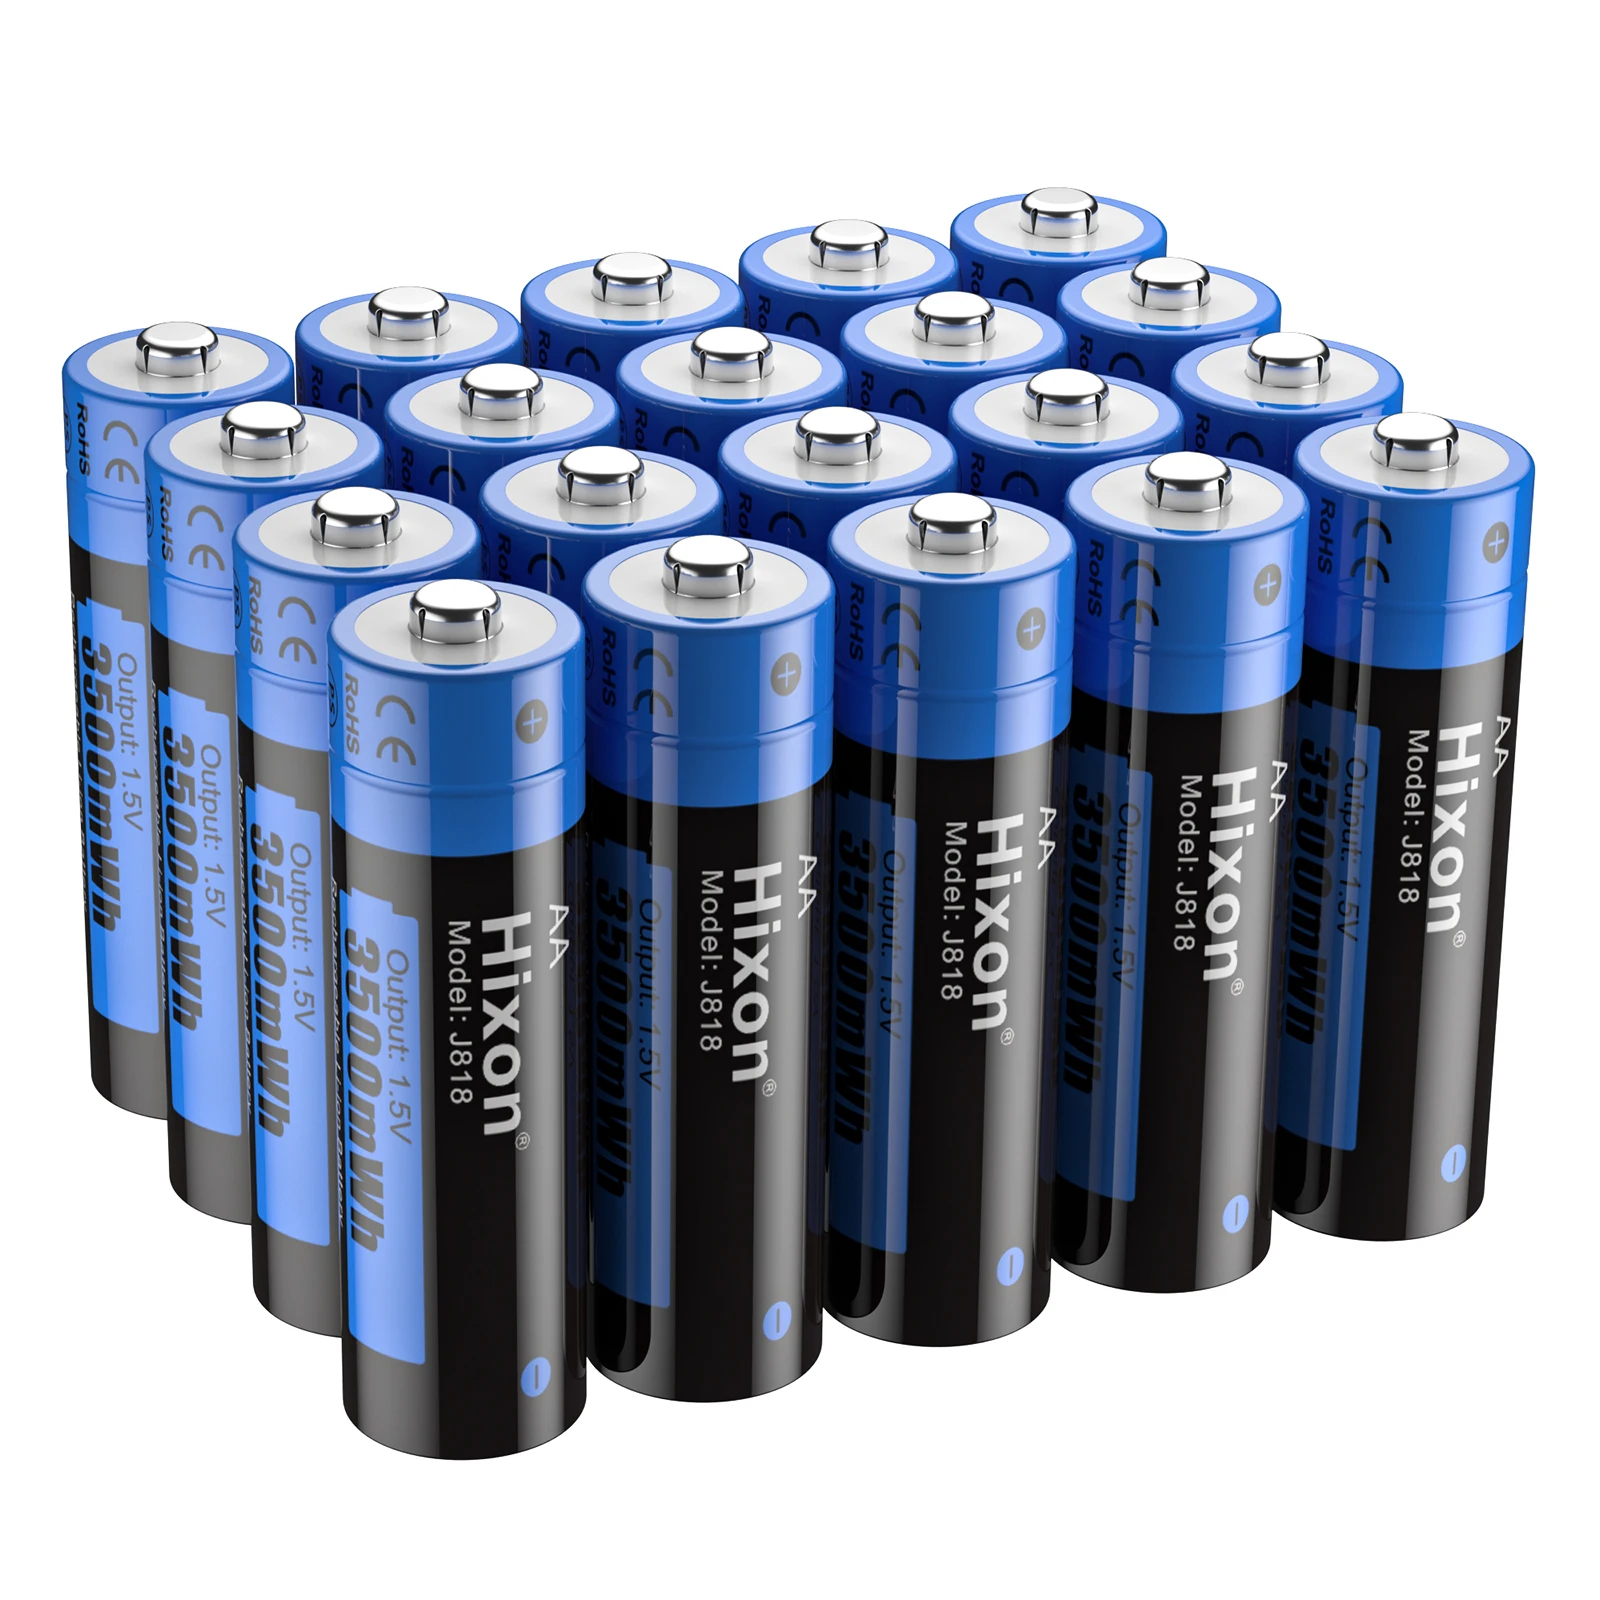 

Hixon 1.5V High Capacity of 3500mWh AA Li-ion Rechargeable Batteries With Quick Charger,Support Wholesale, Flashlight, Fan